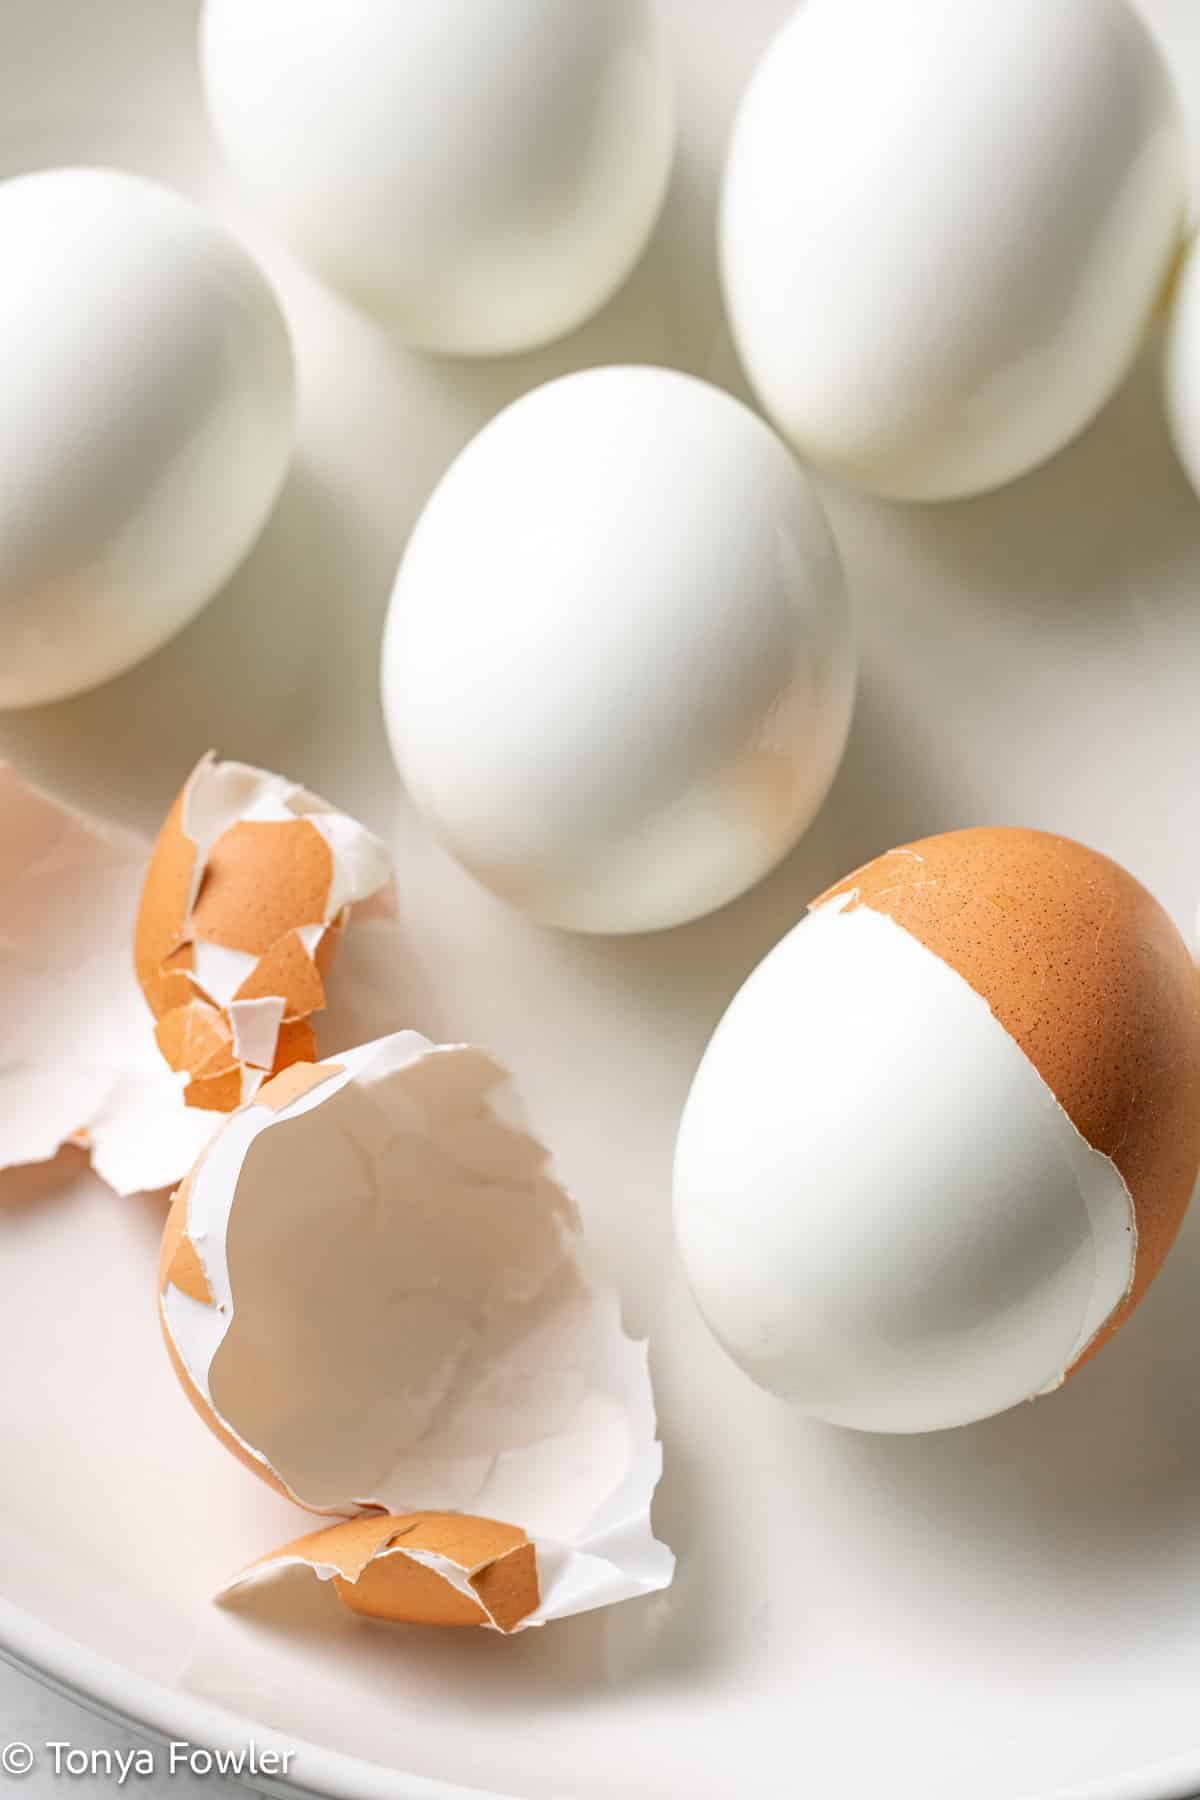 Hard boiled eggs on a plate with half peeled.